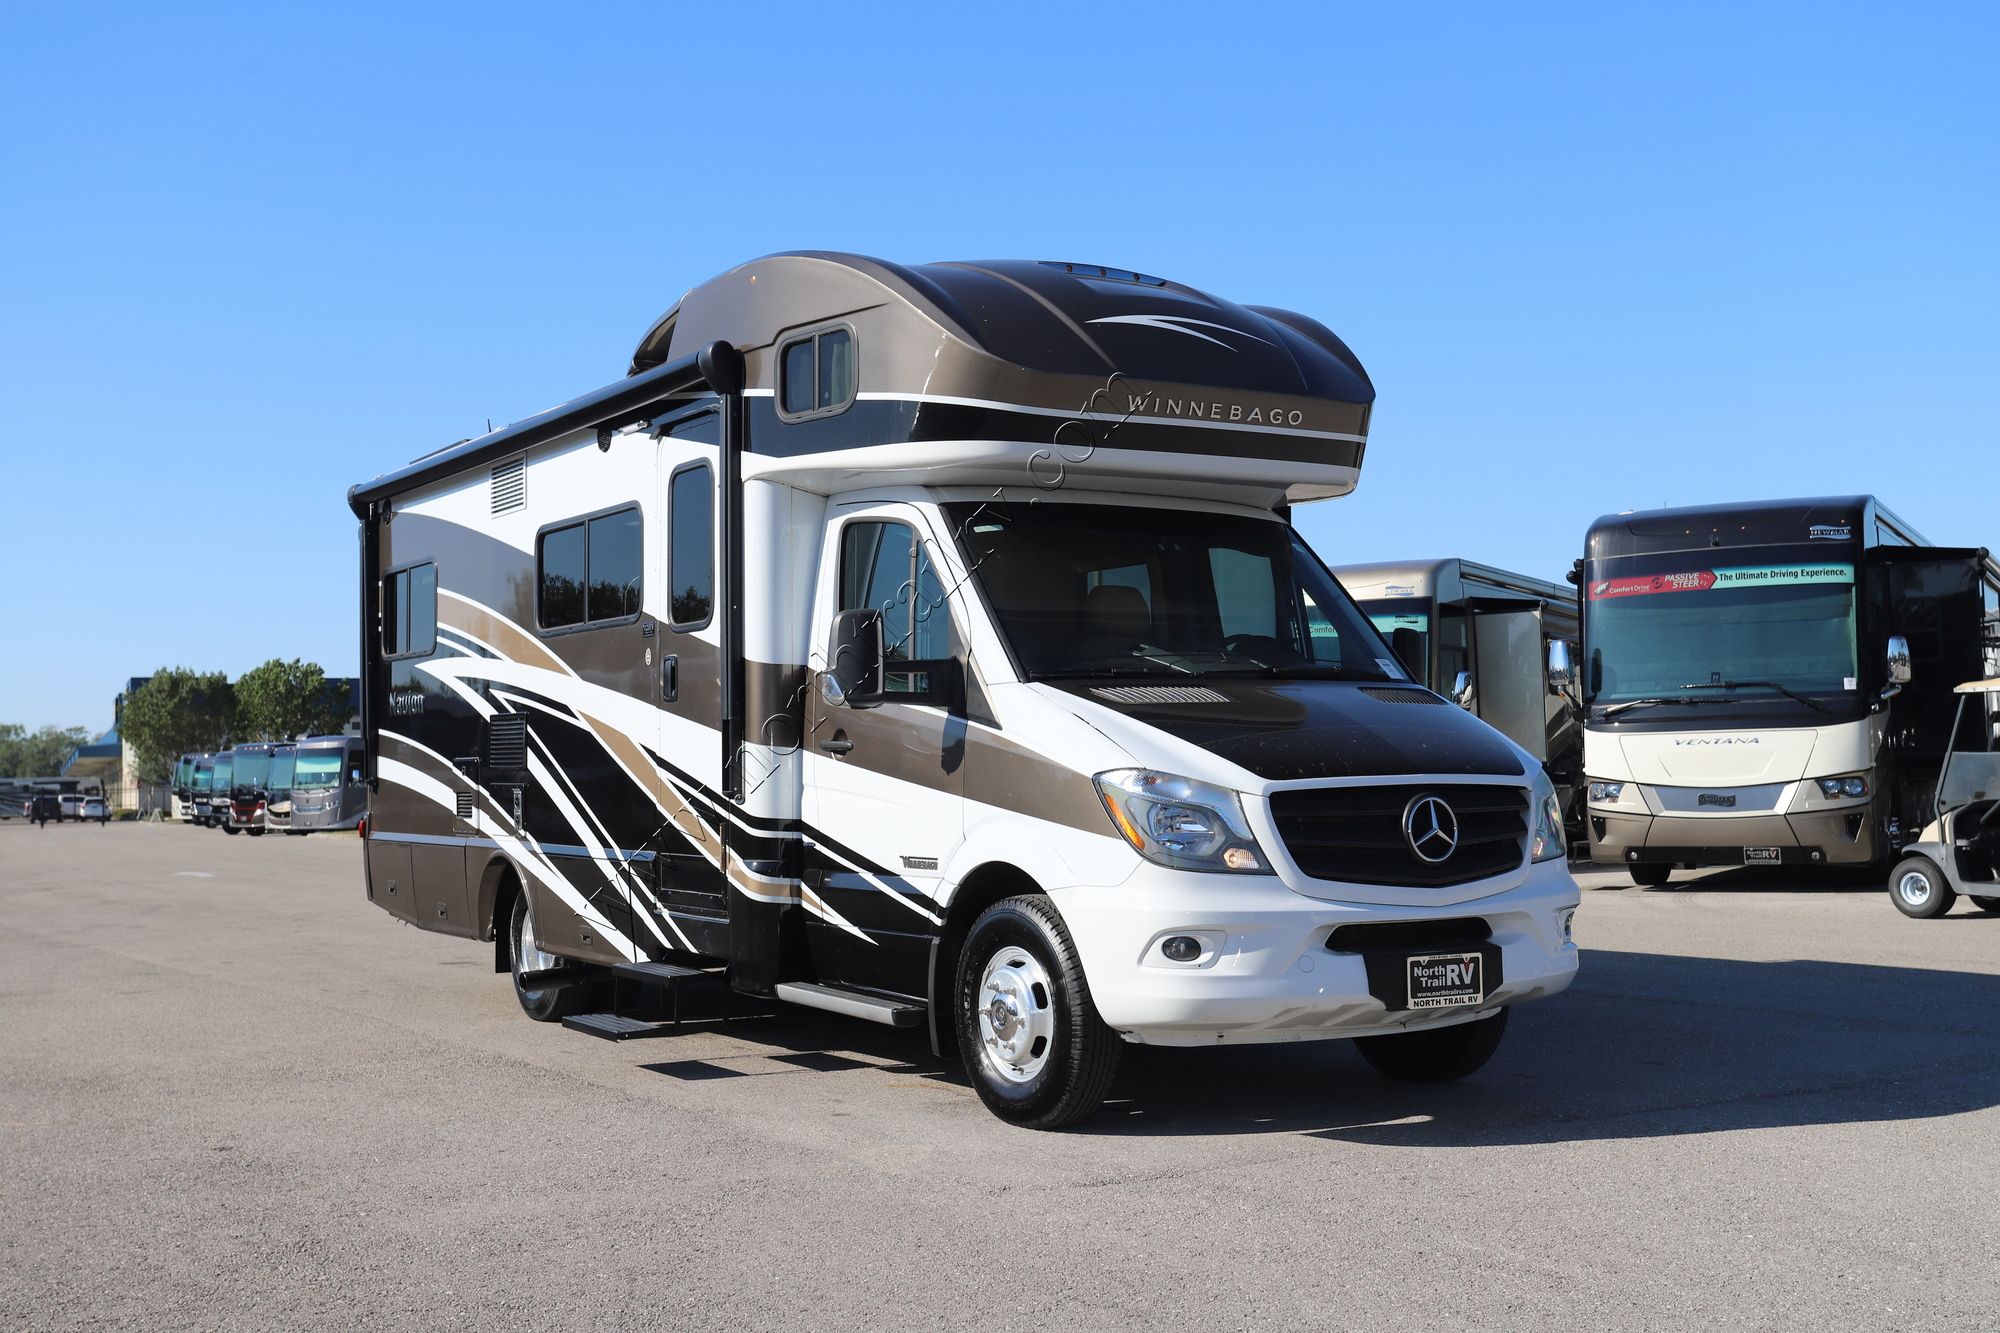 Used 2017 Itasca Navion 24G Class C  For Sale